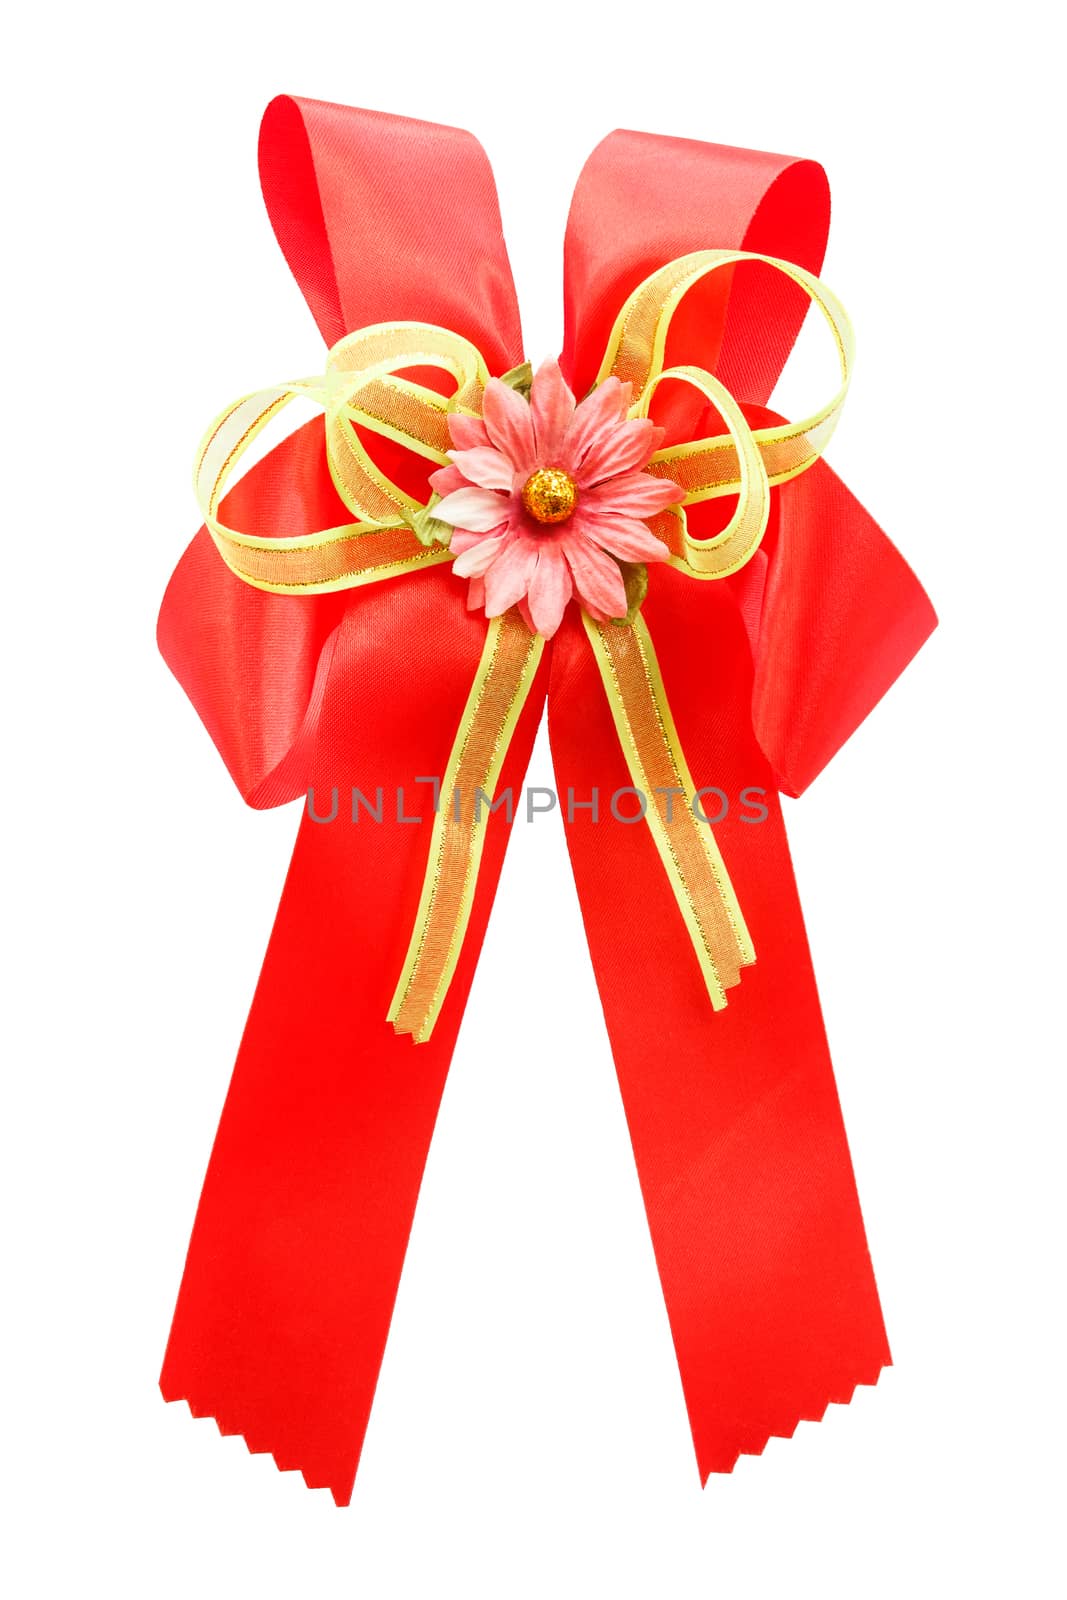 red color bow and artificial flower on white background (isolated)